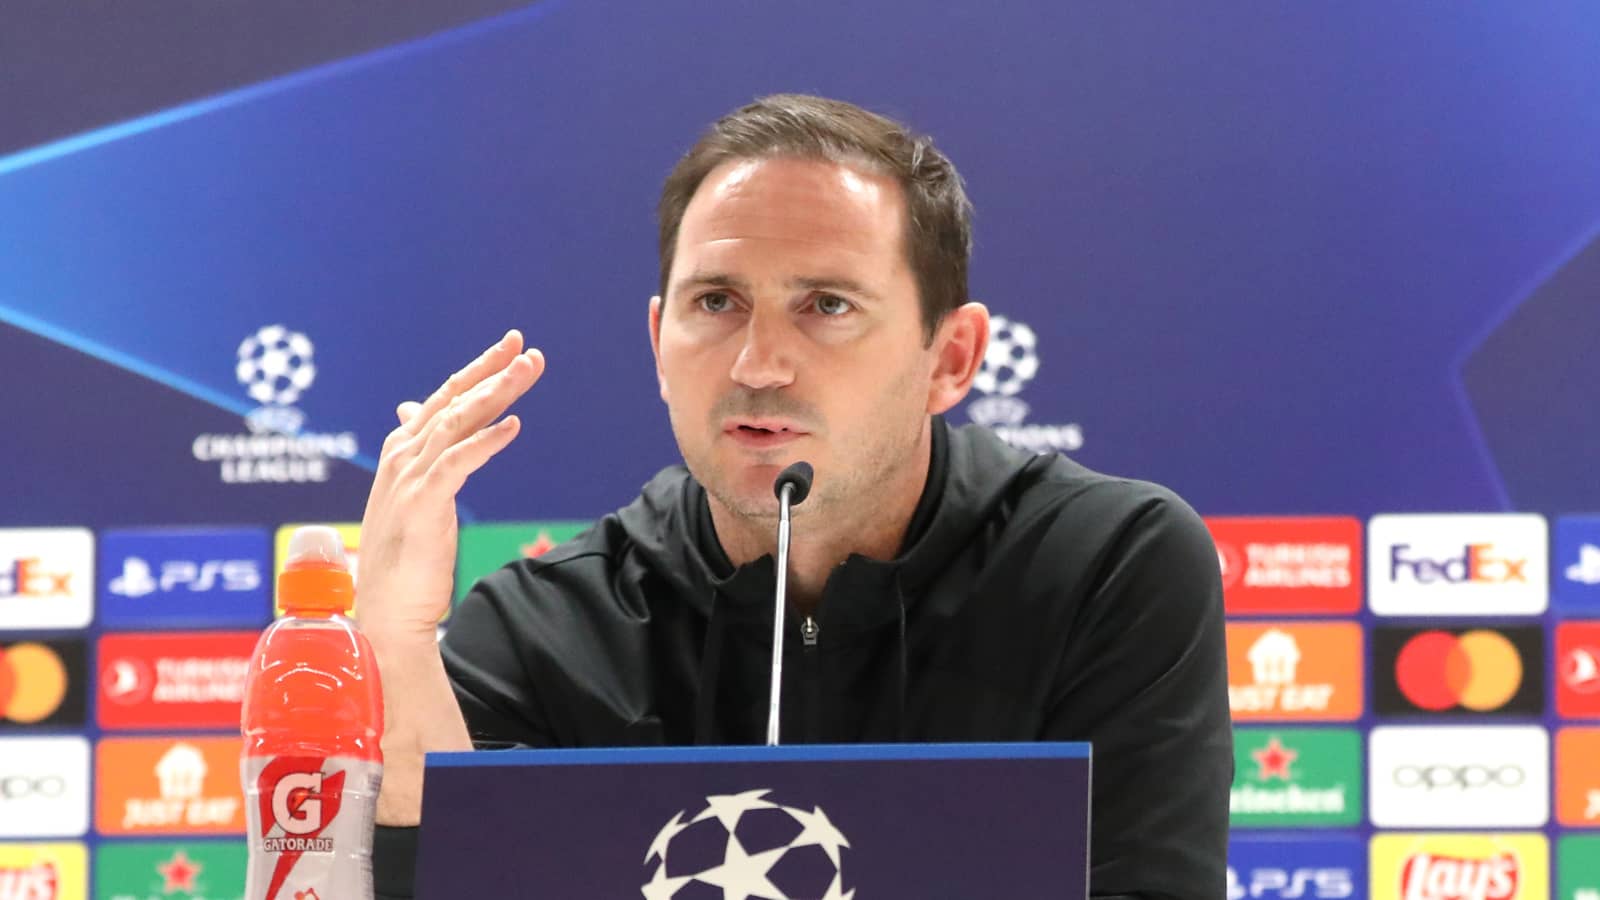 EPL: Chelsea take decision on sacking Lampard as interim manager